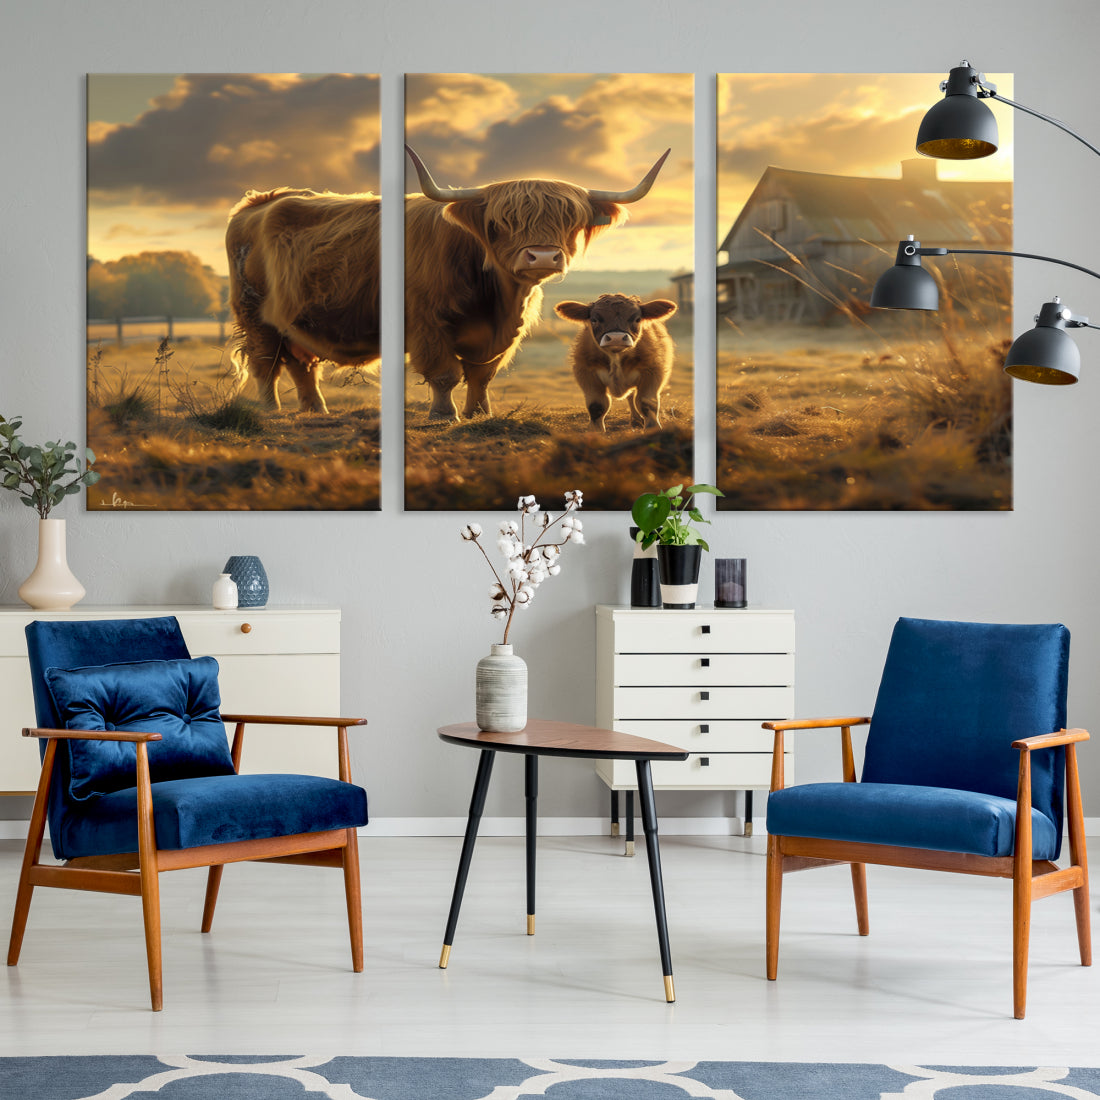 Highland Cow Canvas Wall Art Animal Print Pictures Fluffy Cattle Photo Framed Farmhouse Painting